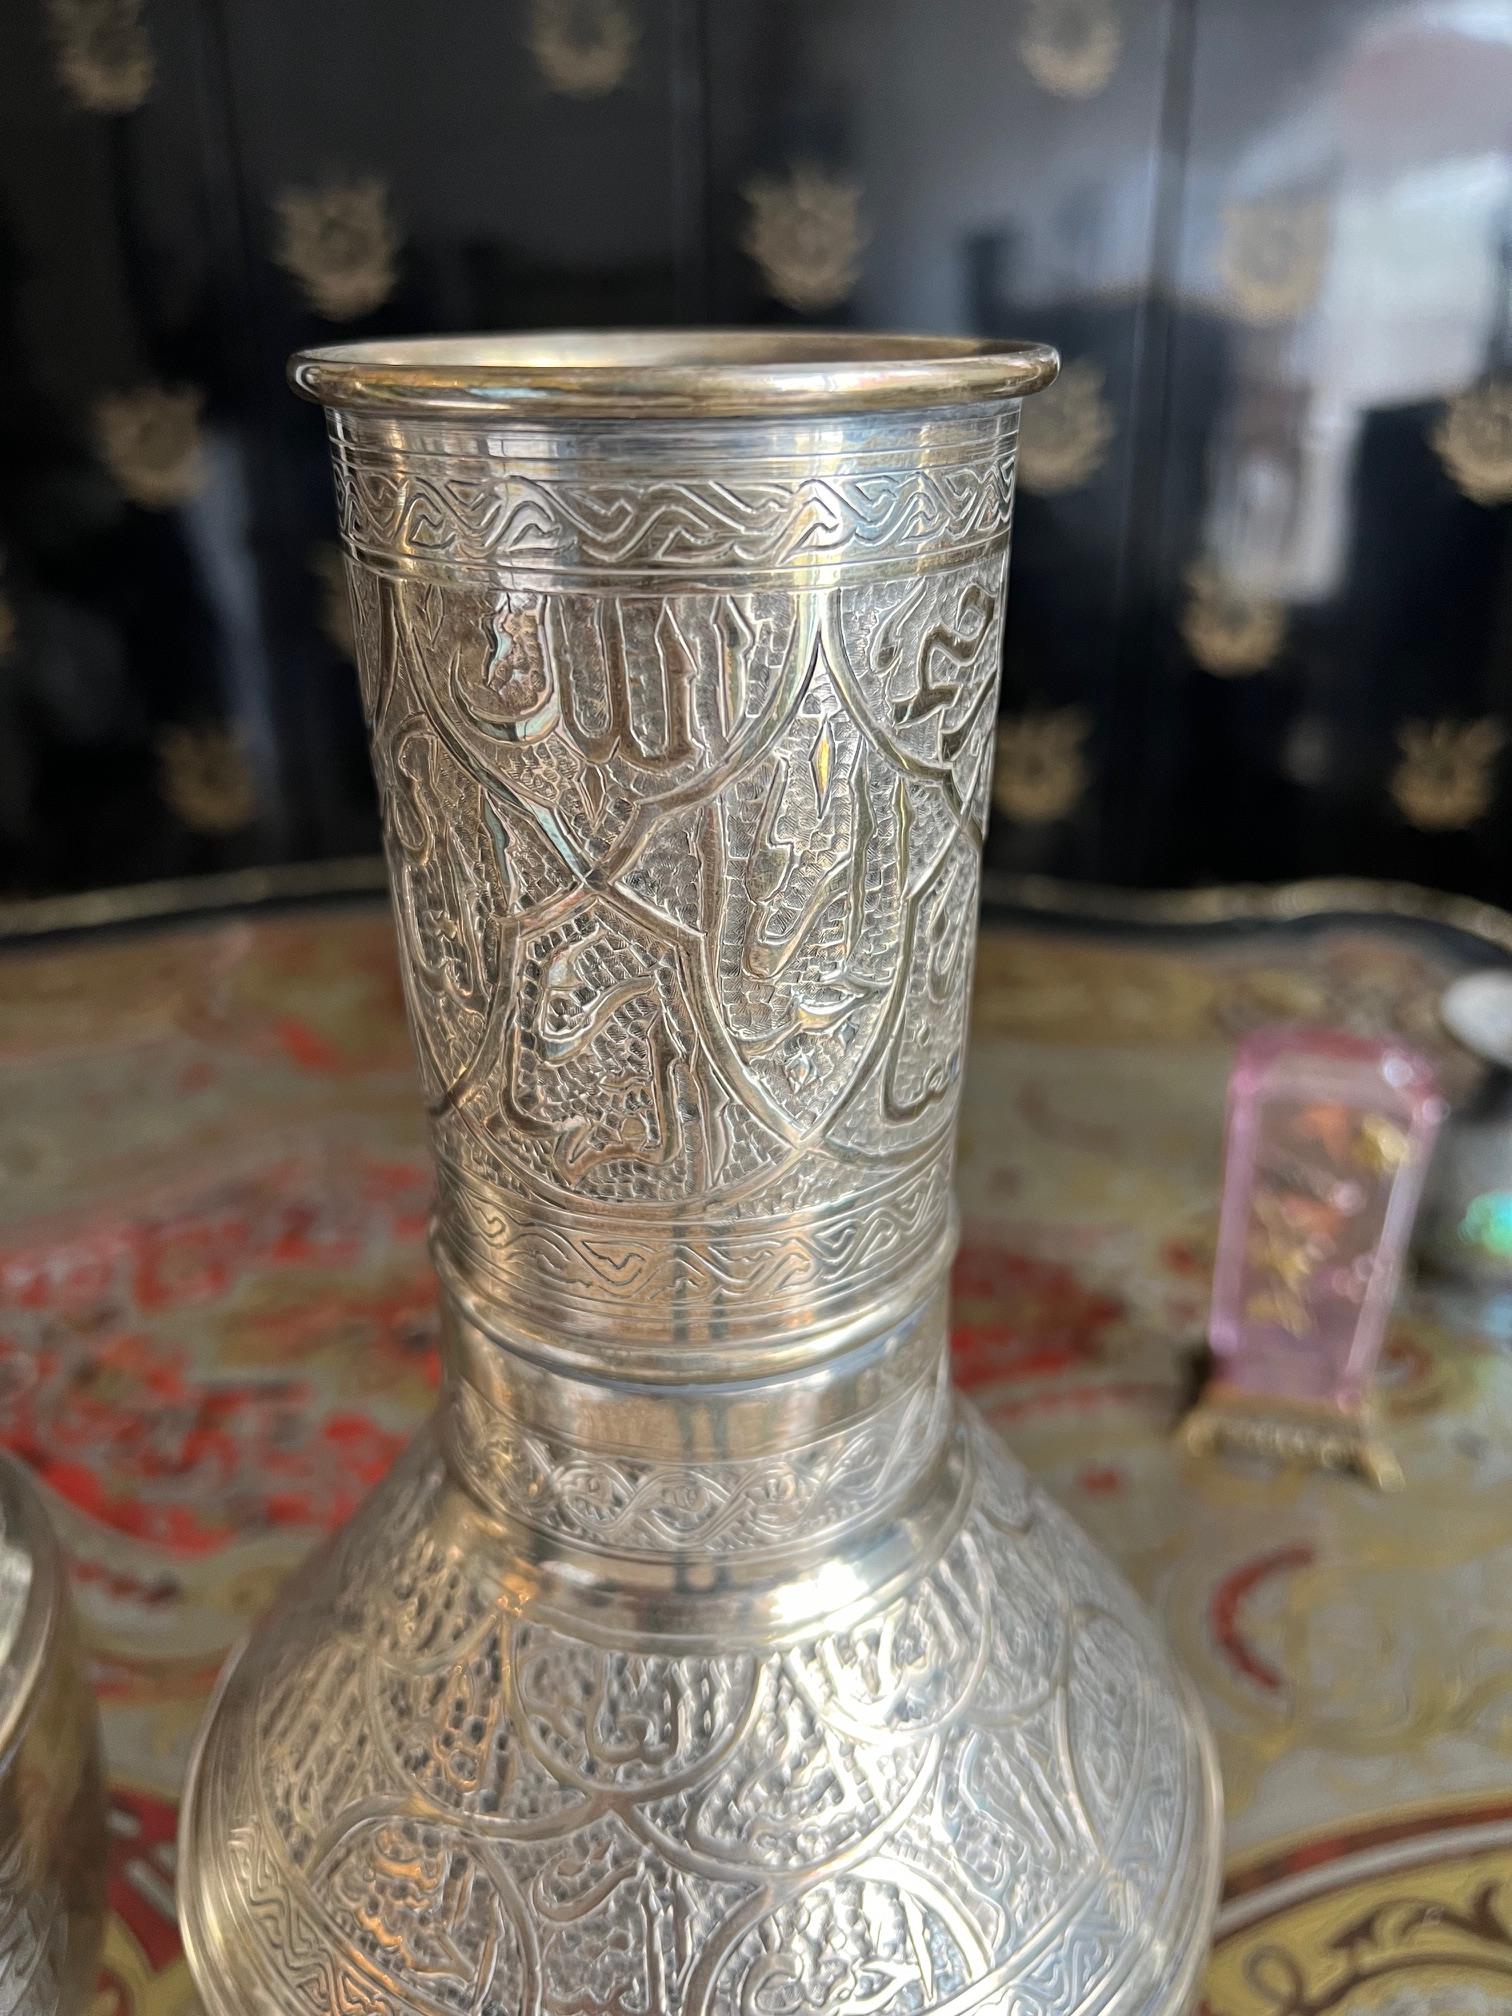 A PAIR OF SILVER ISLAMIC CALLIGRAPHIC VASES - Image 5 of 9